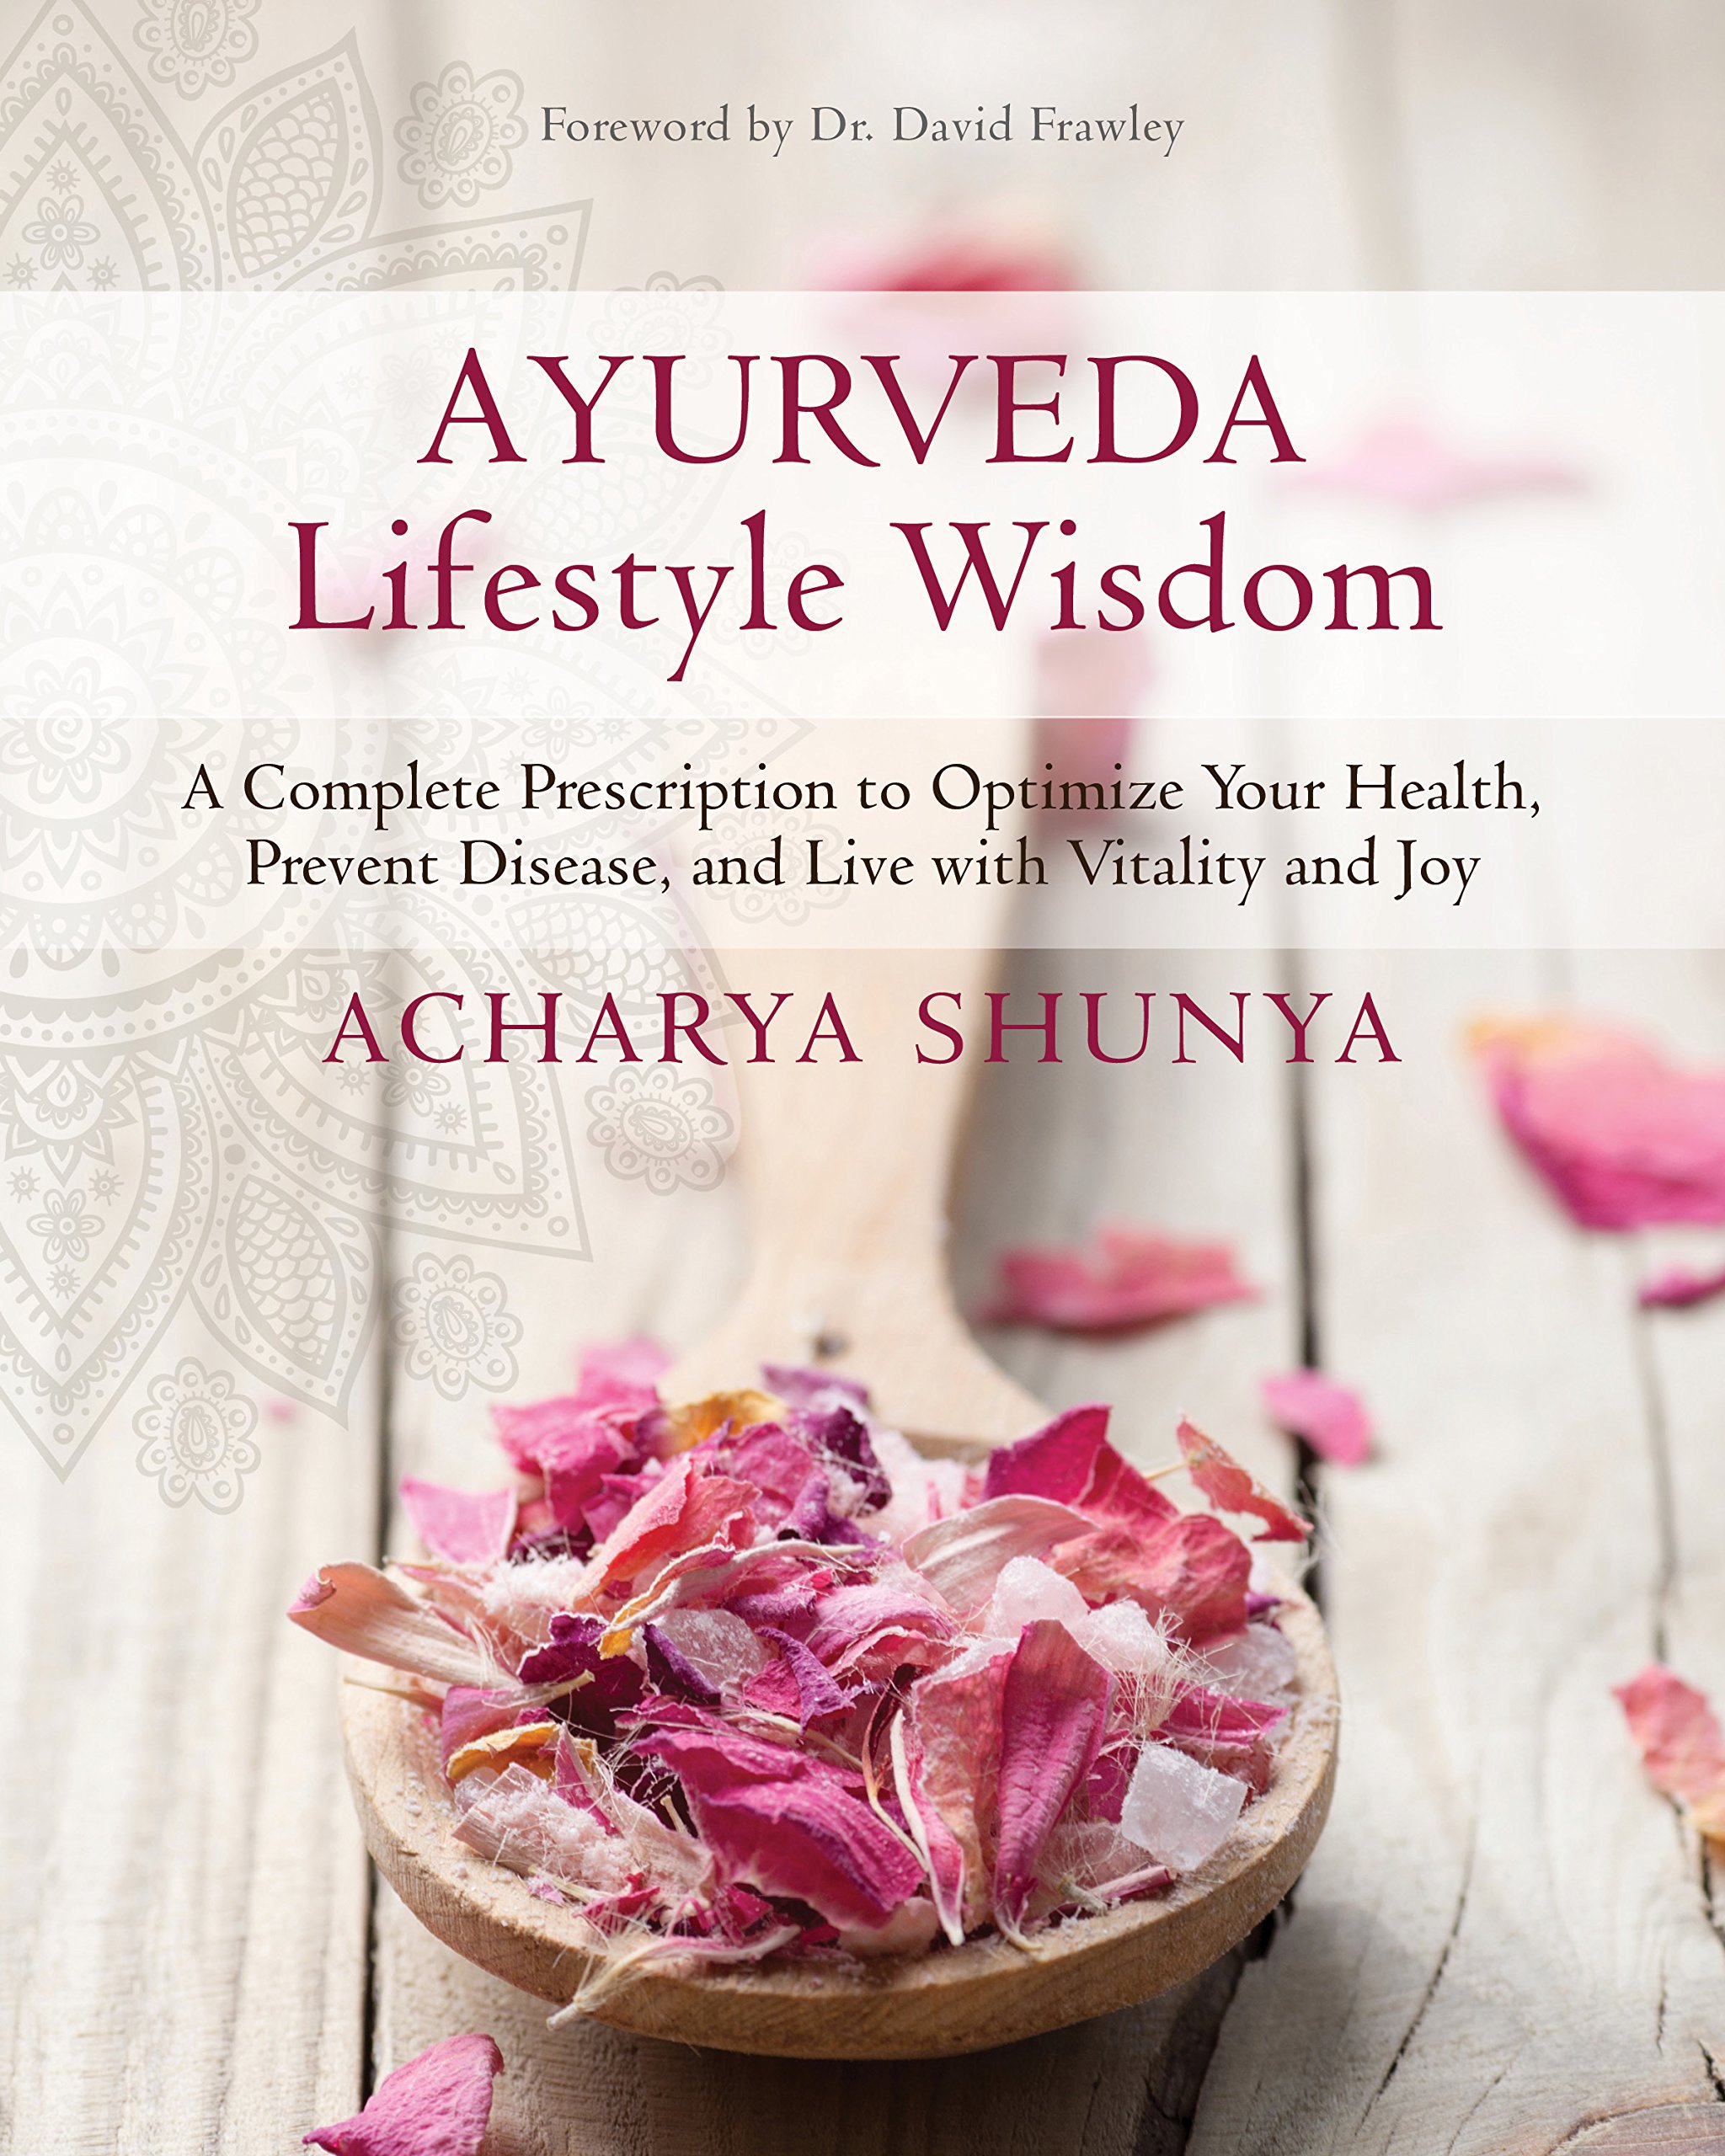 phd thesis topics in ayurveda